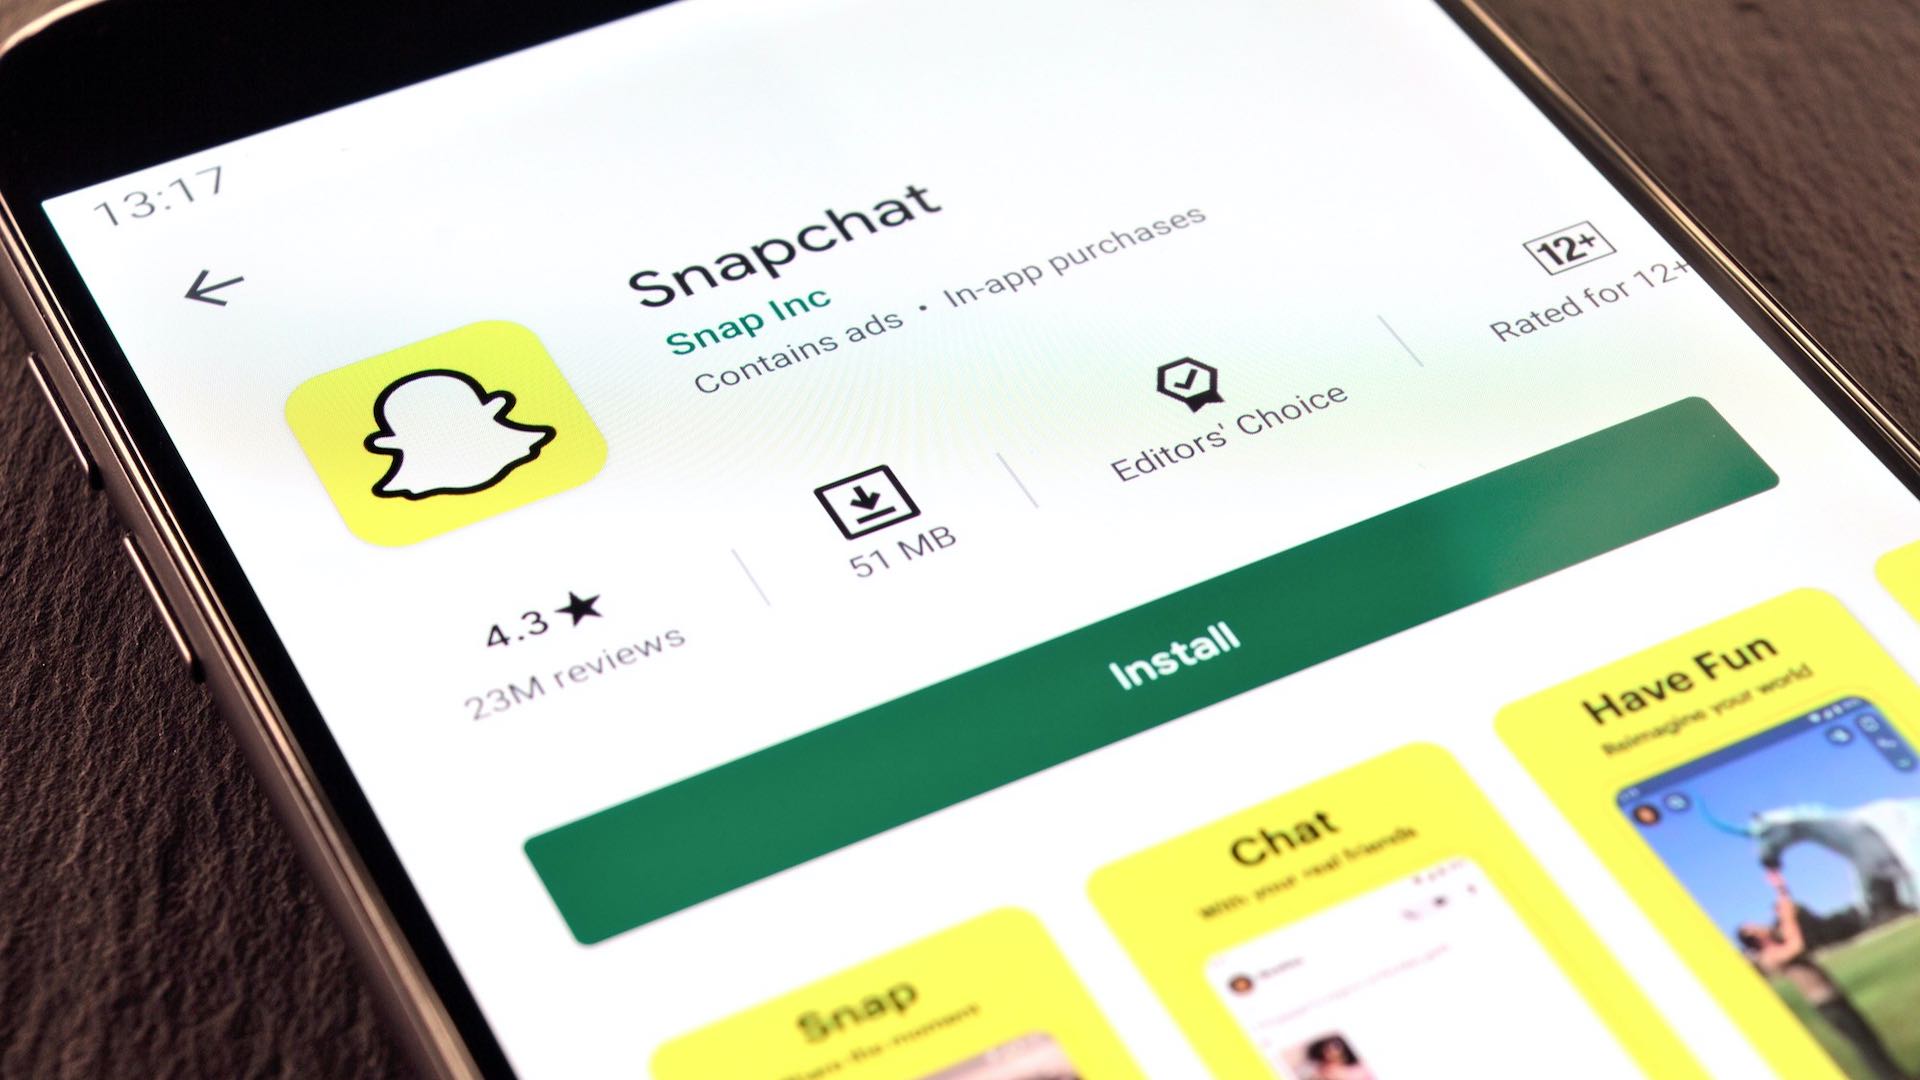 Snap Inc.、従業員の 10% 削減を発表、500 人の雇用に影響